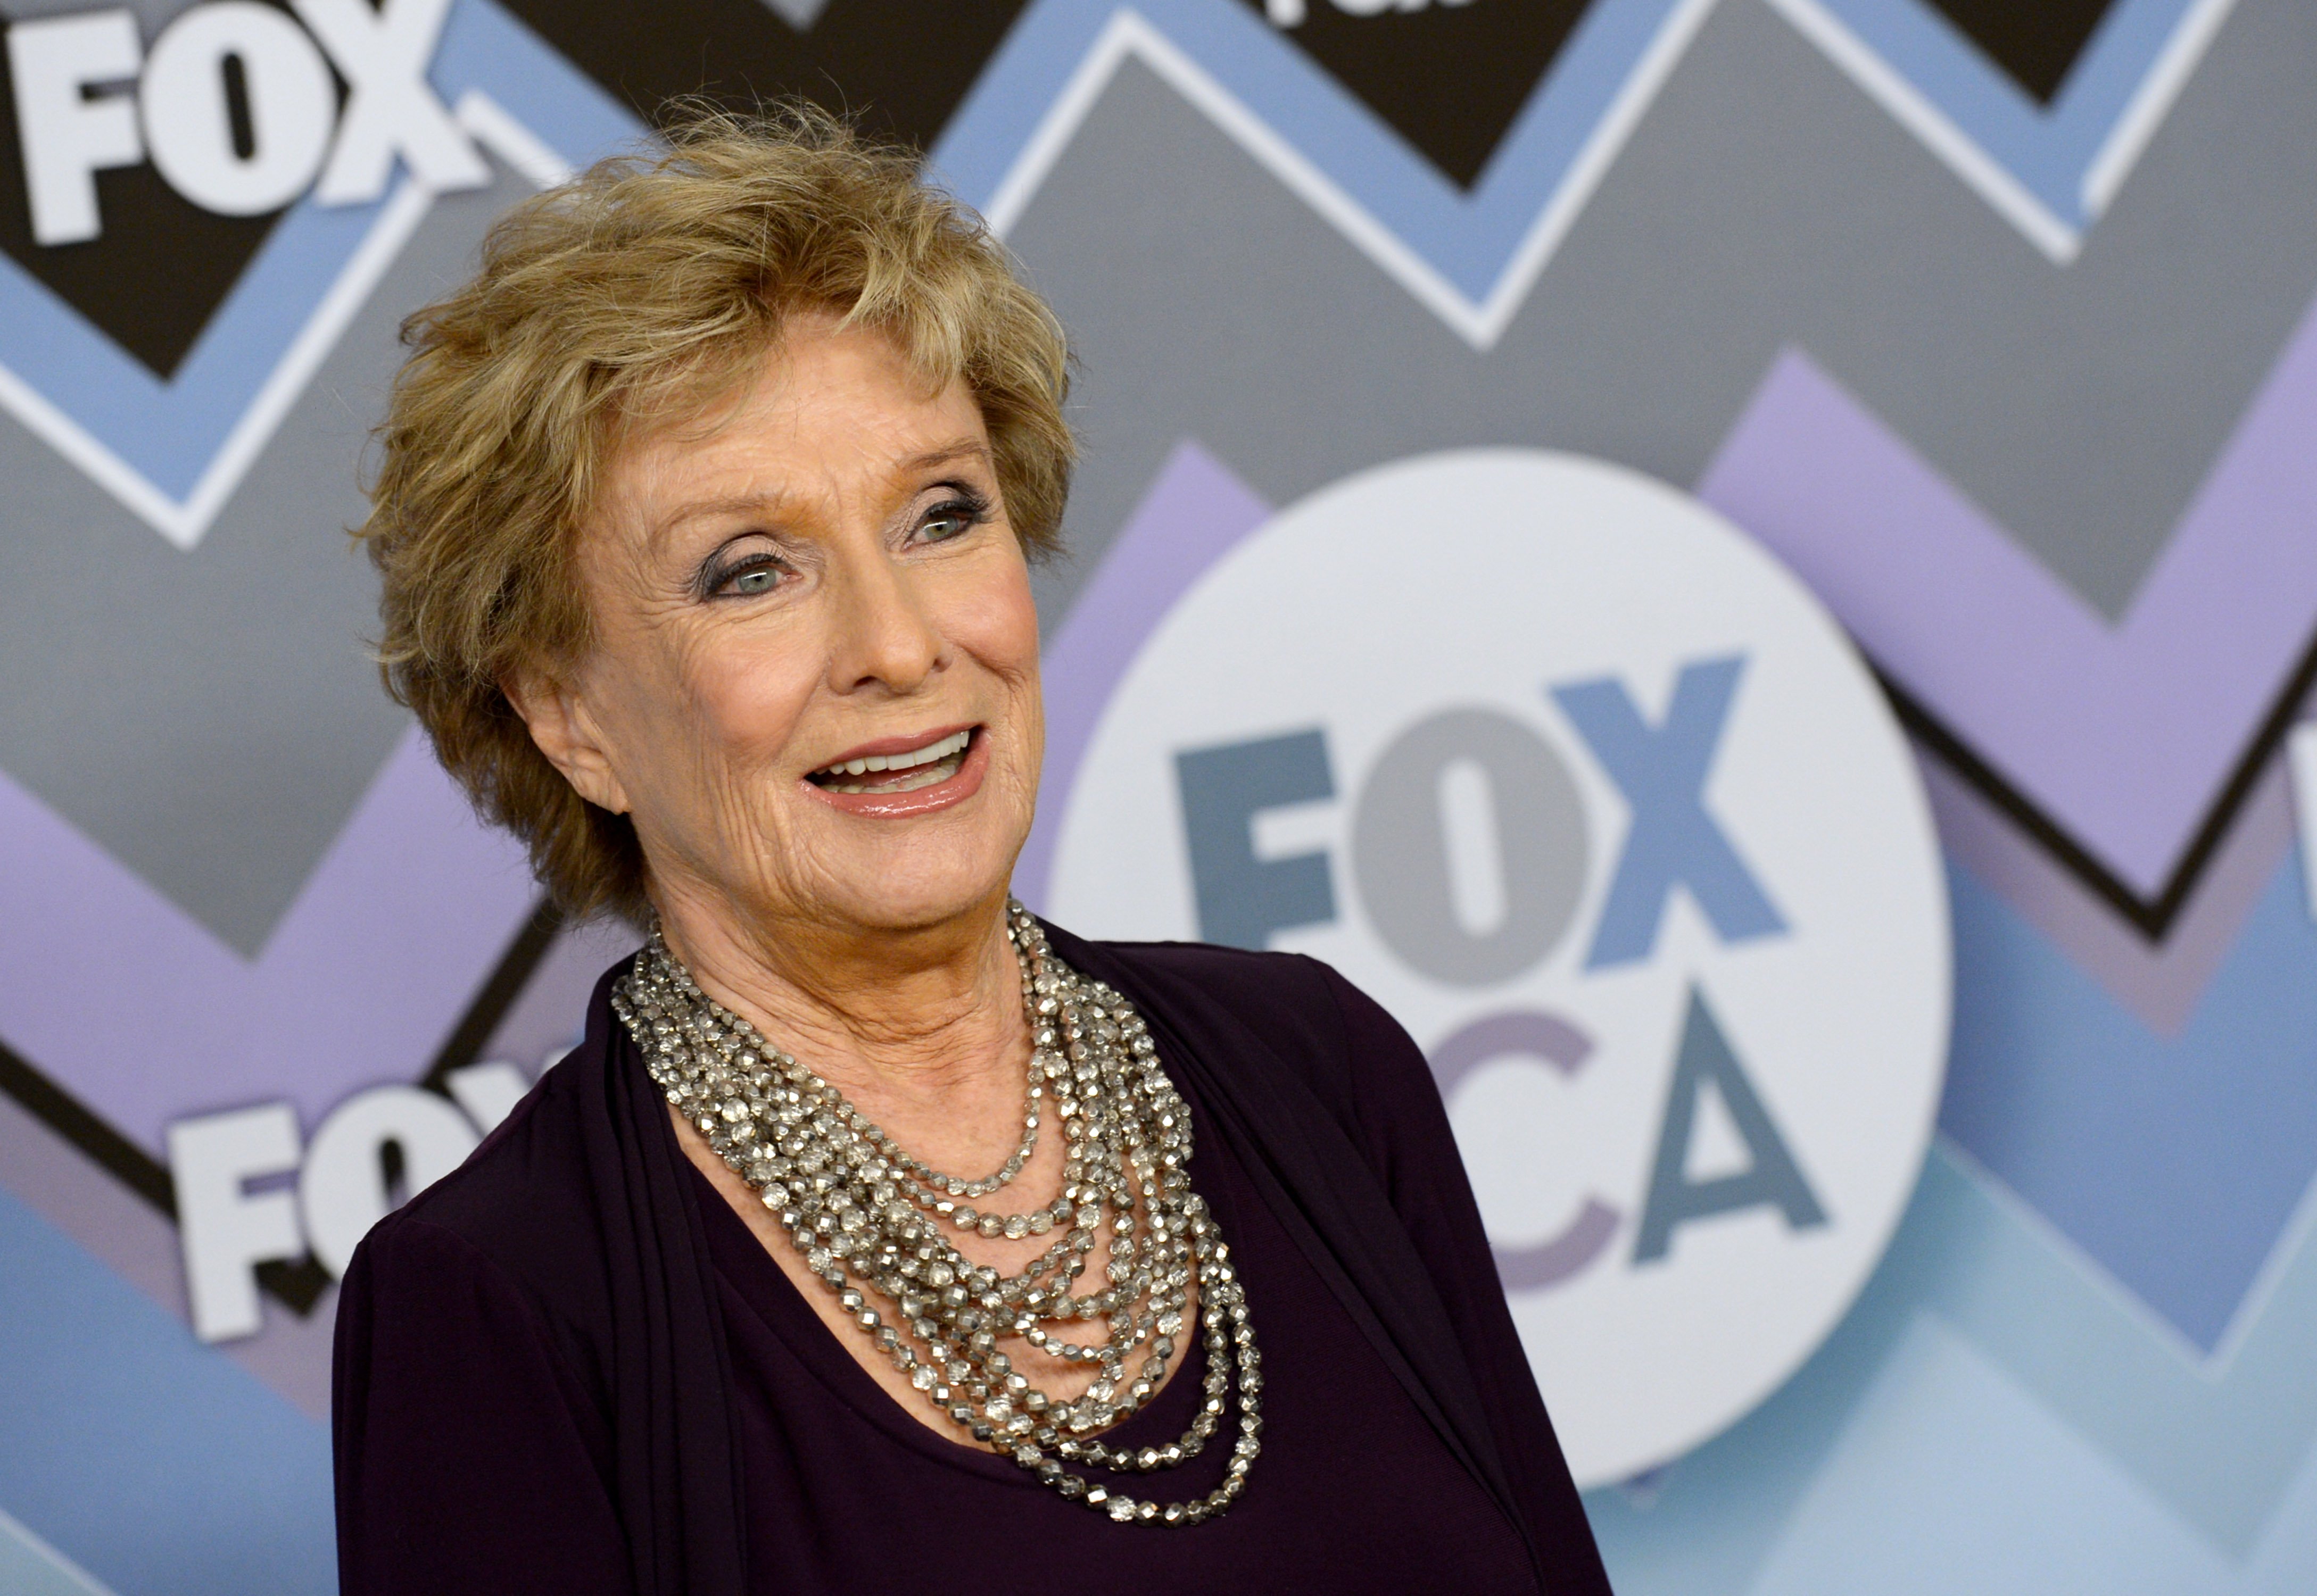  Actress Cloris Leachman arrives at the FOX All-Star Party at the Langham Huntington Hotel on January 8, 2013 in Pasadena, California. | Source: Getty Images